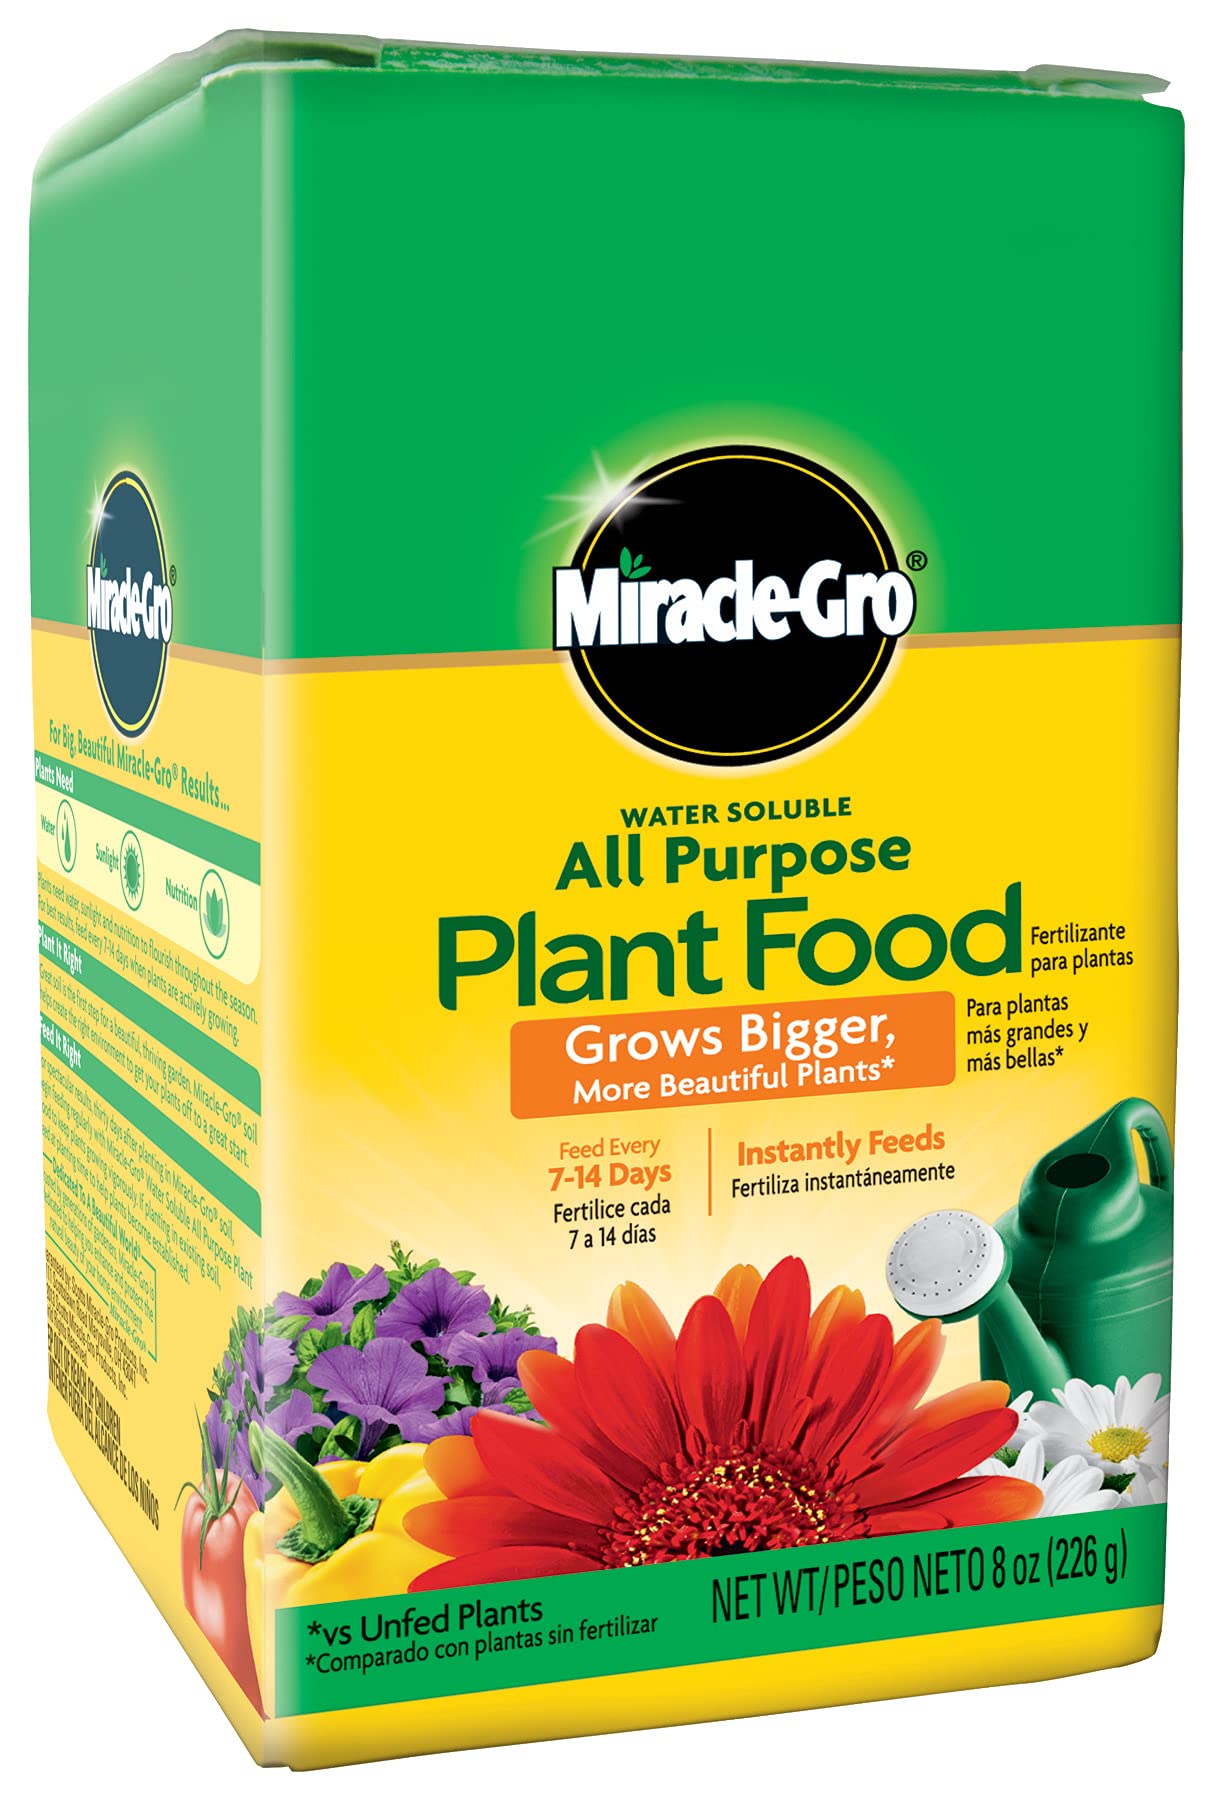 Miracle-Gro Water Soluble All Purpose Plant Food, Fertilizer for Indoor or Outdoor Flowers, Vegetables or Trees, 8 oz.